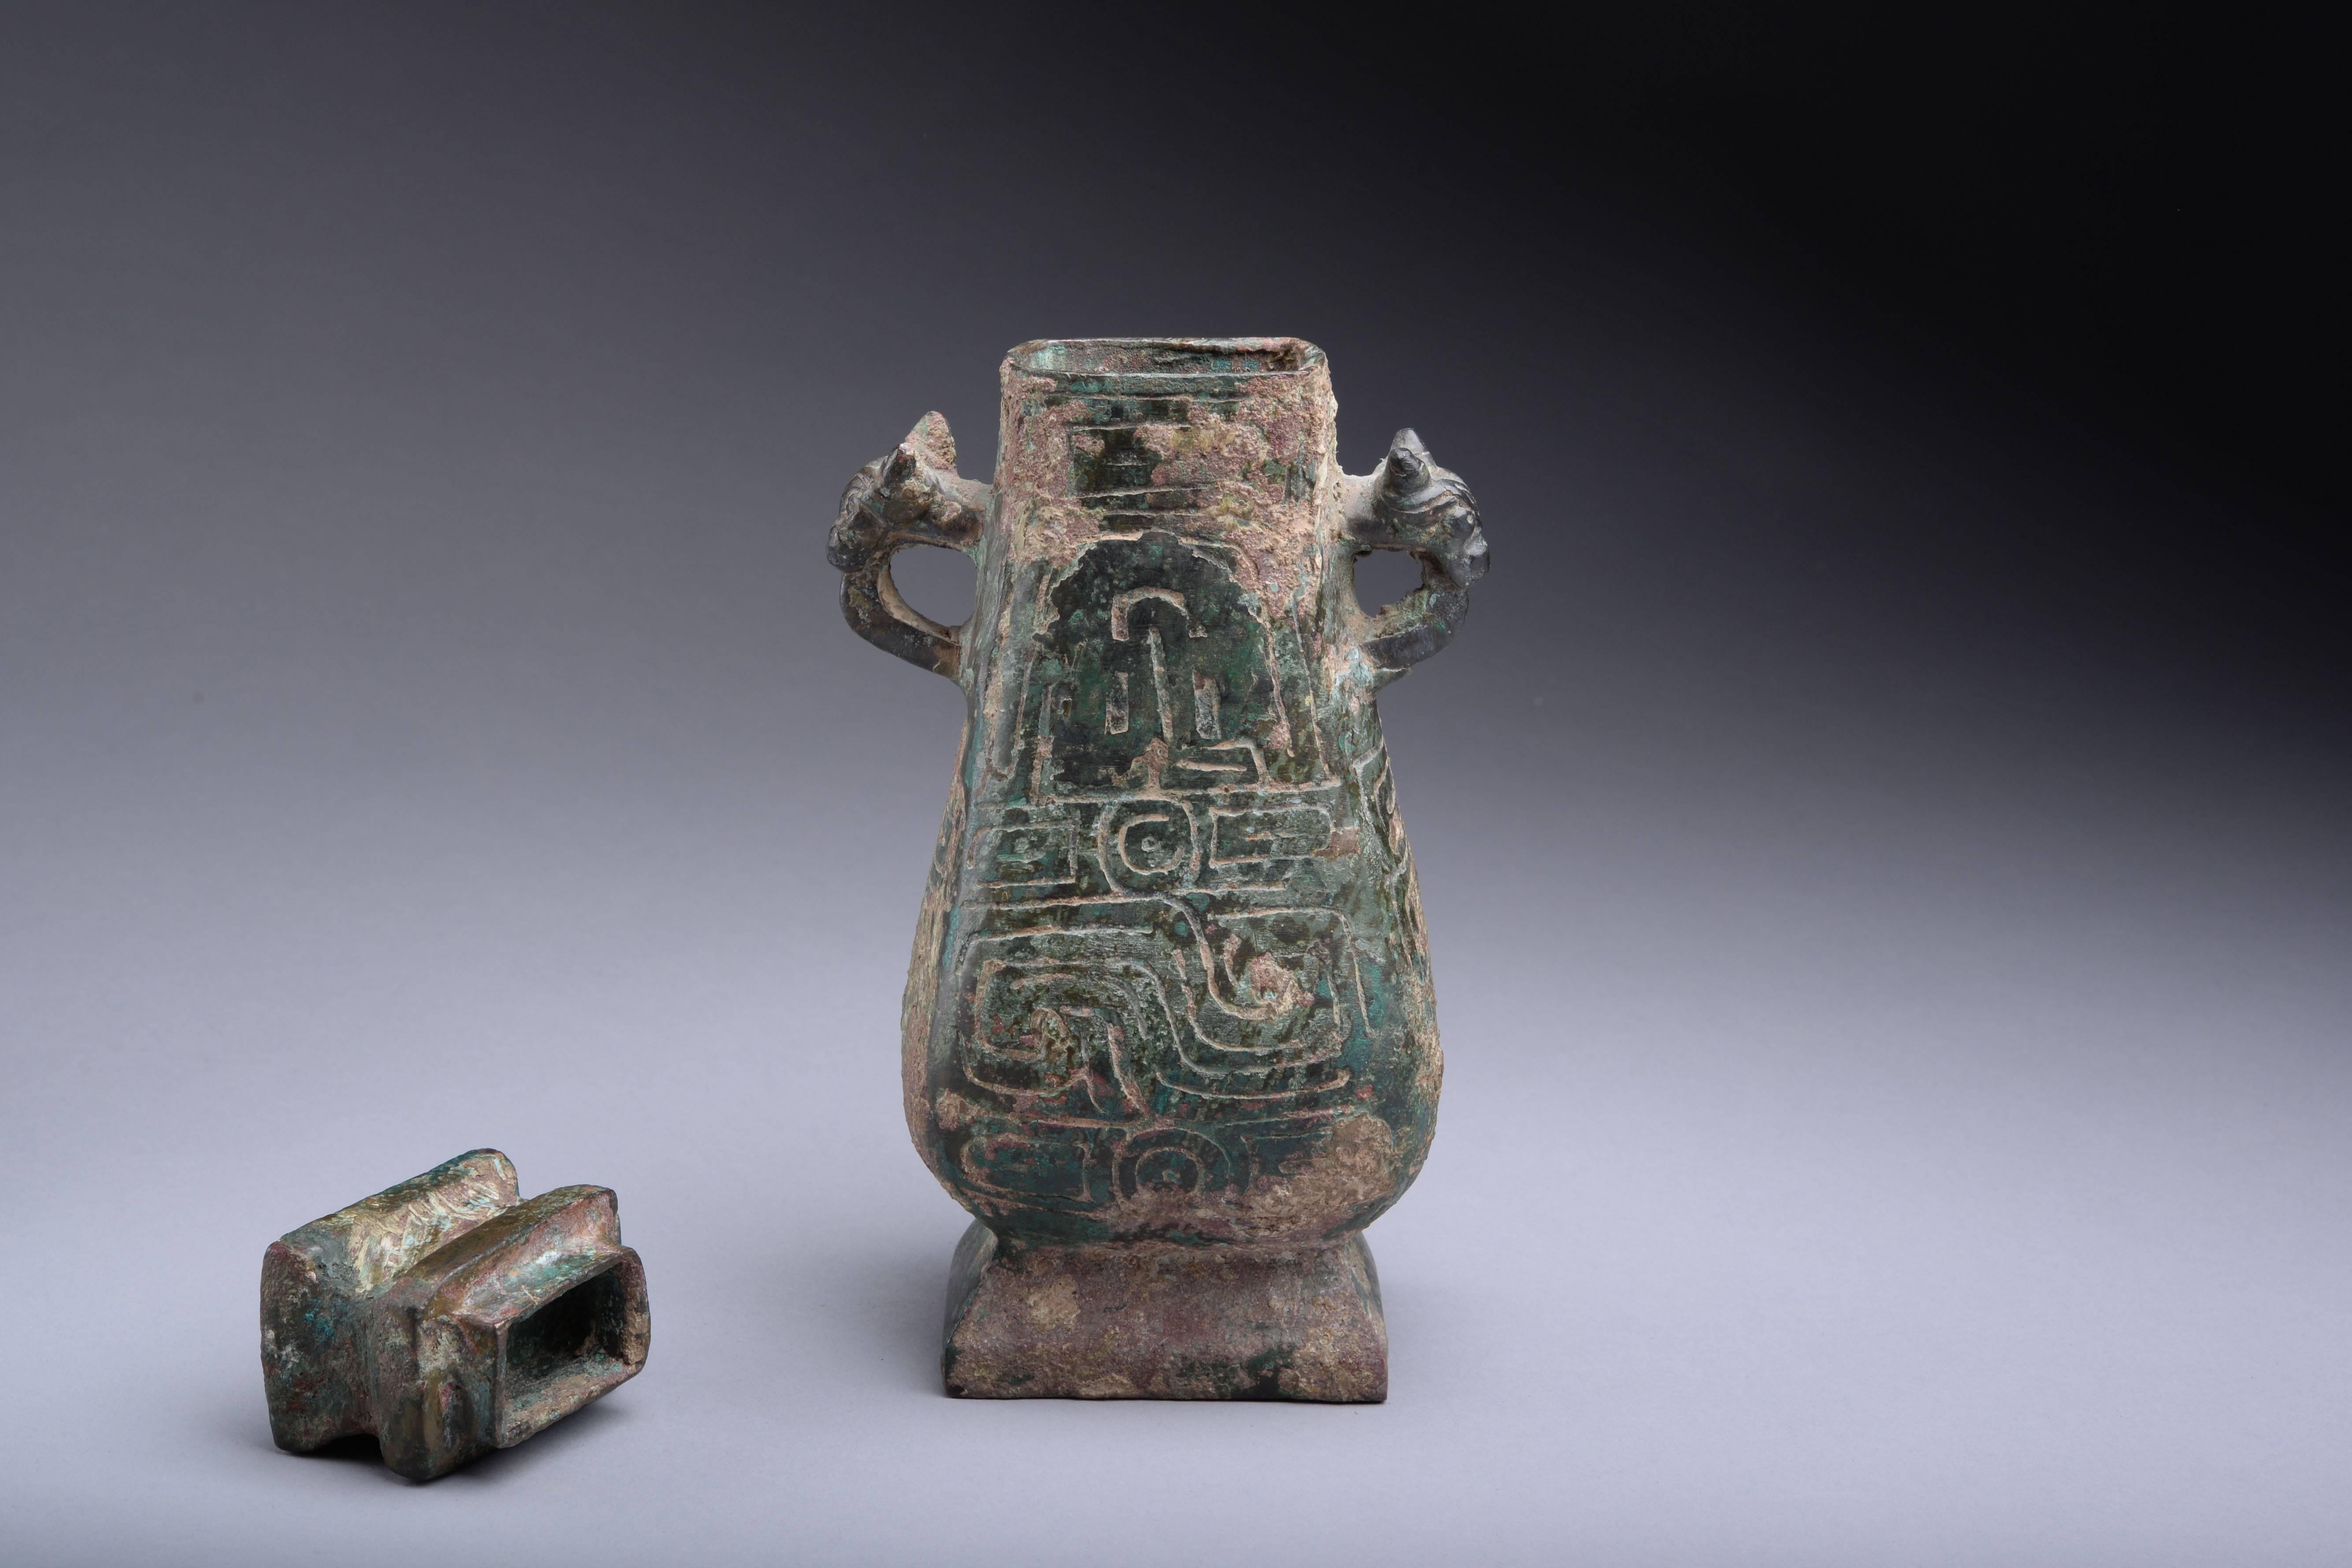 An ancient Chinese ritual bronze food vessel, or Hu, dating to the Western Zhou period, circa 800-700 BC.

Cast in bronze, the vessel with pear shaped body, flaring rectangular base, straight lip and separately cast lid. The circular handles with